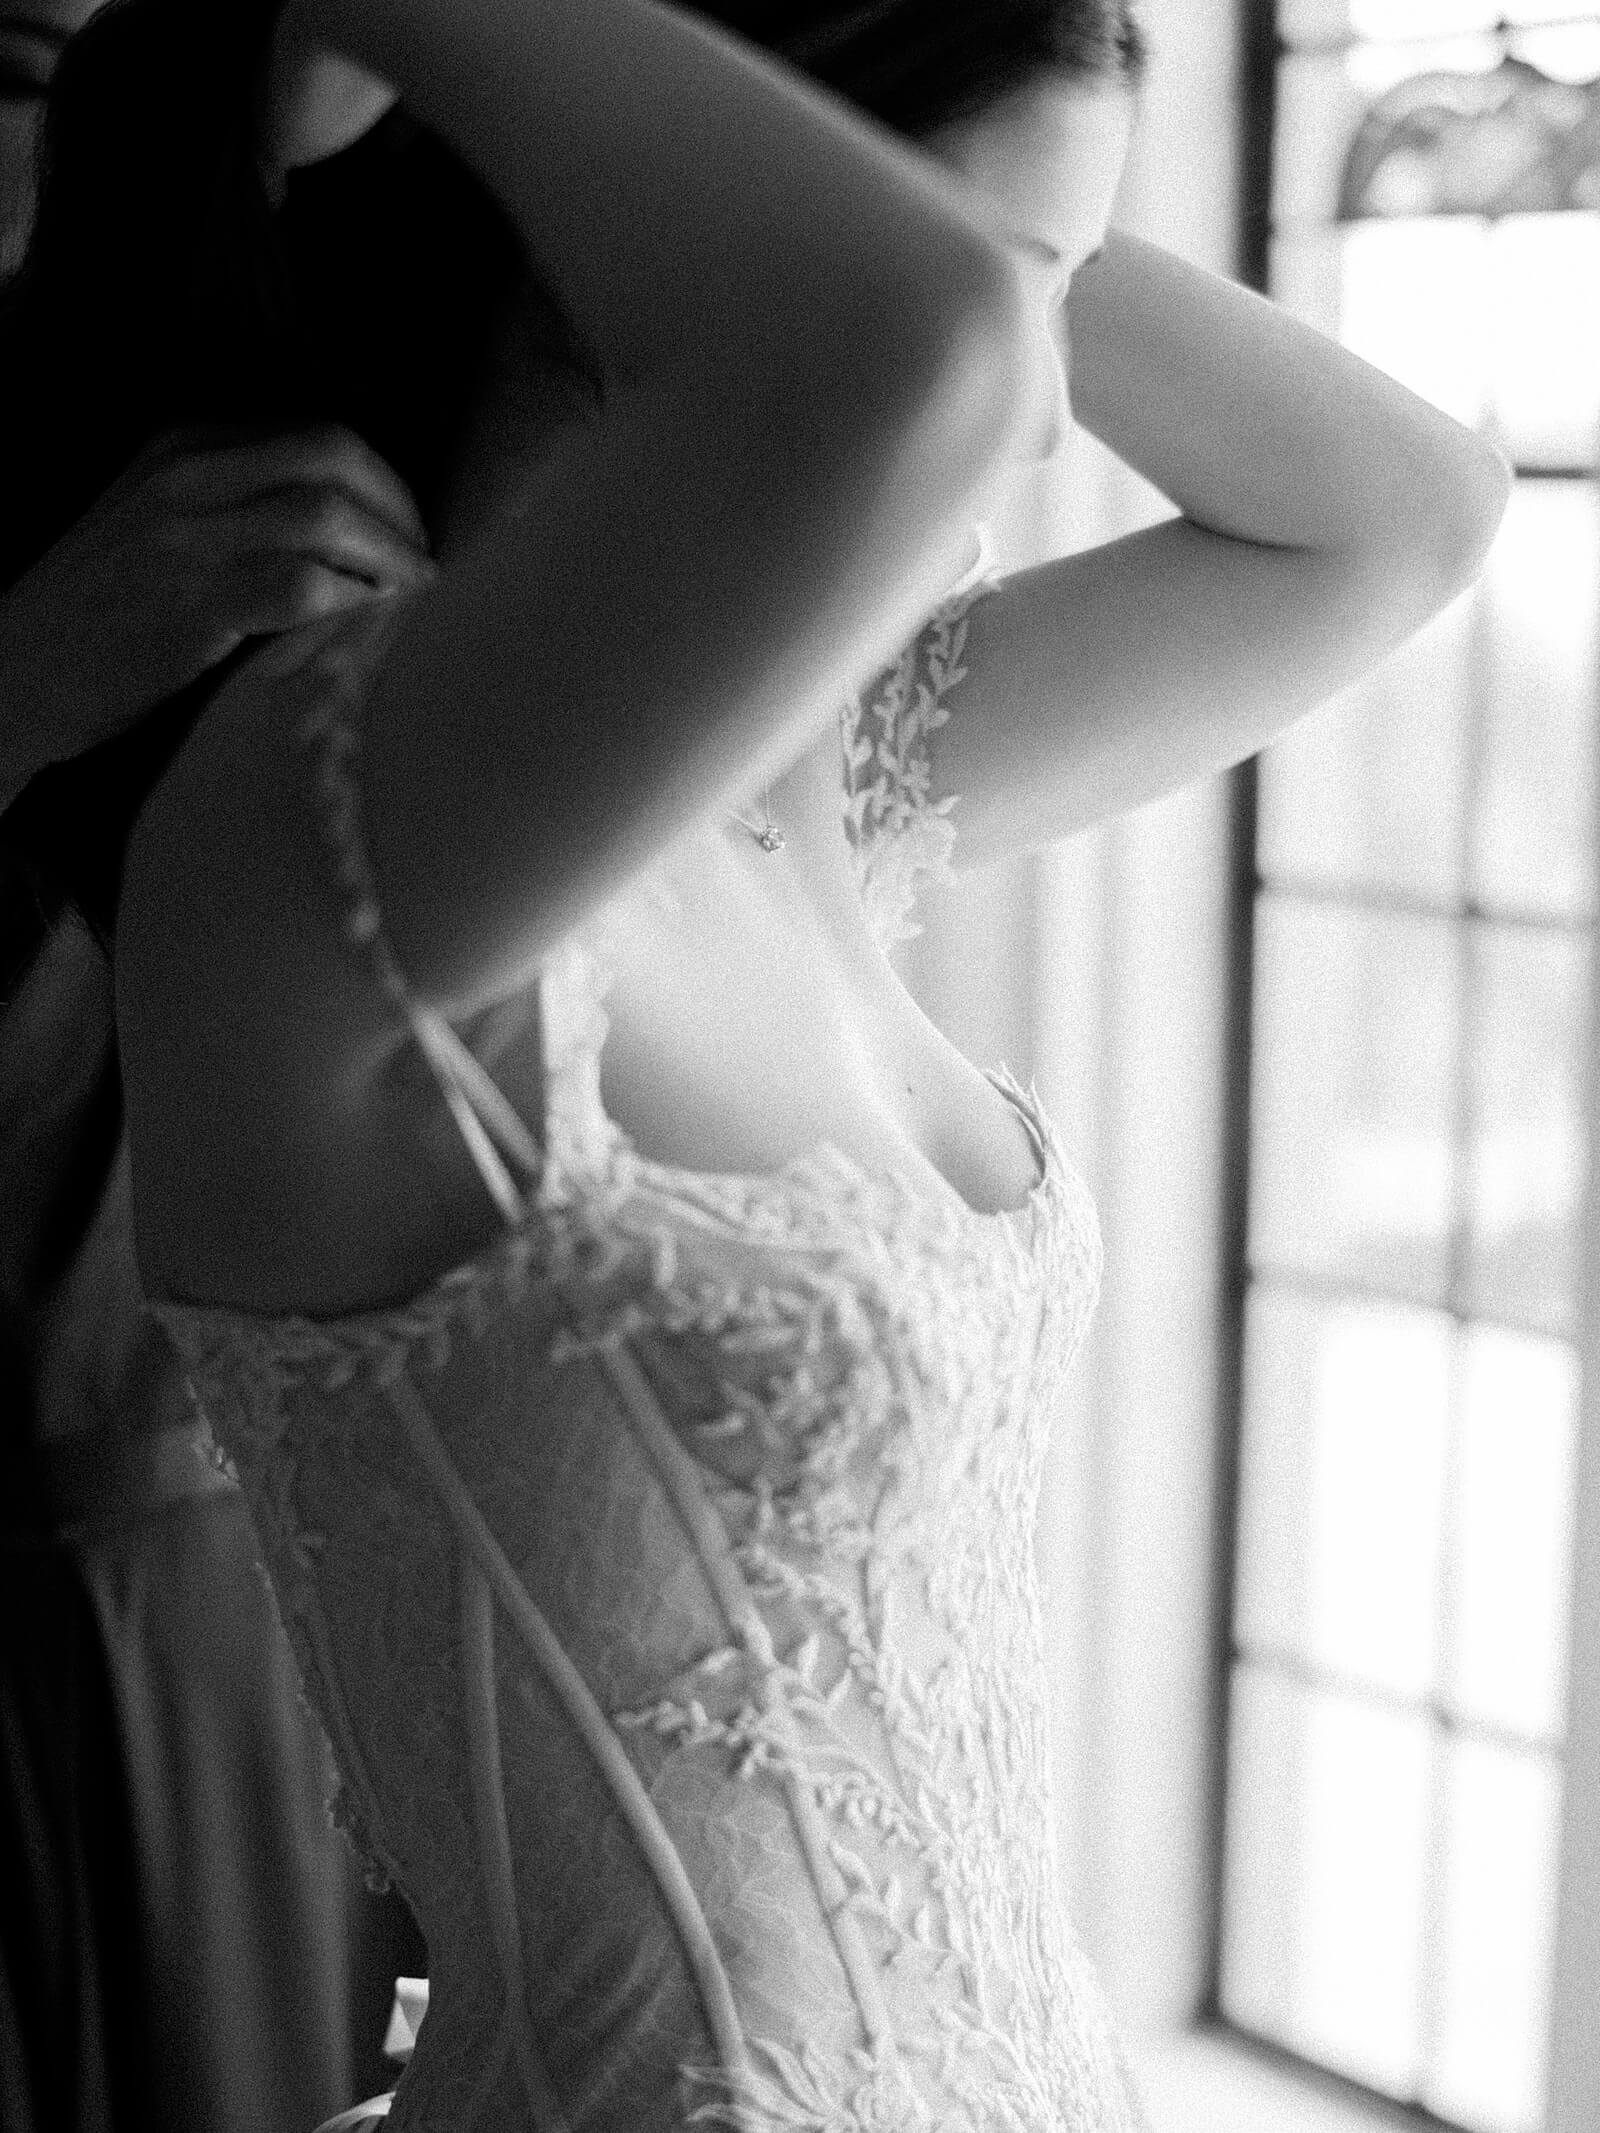 Bride getting ready in black and white - Jacqueline Benét Photography